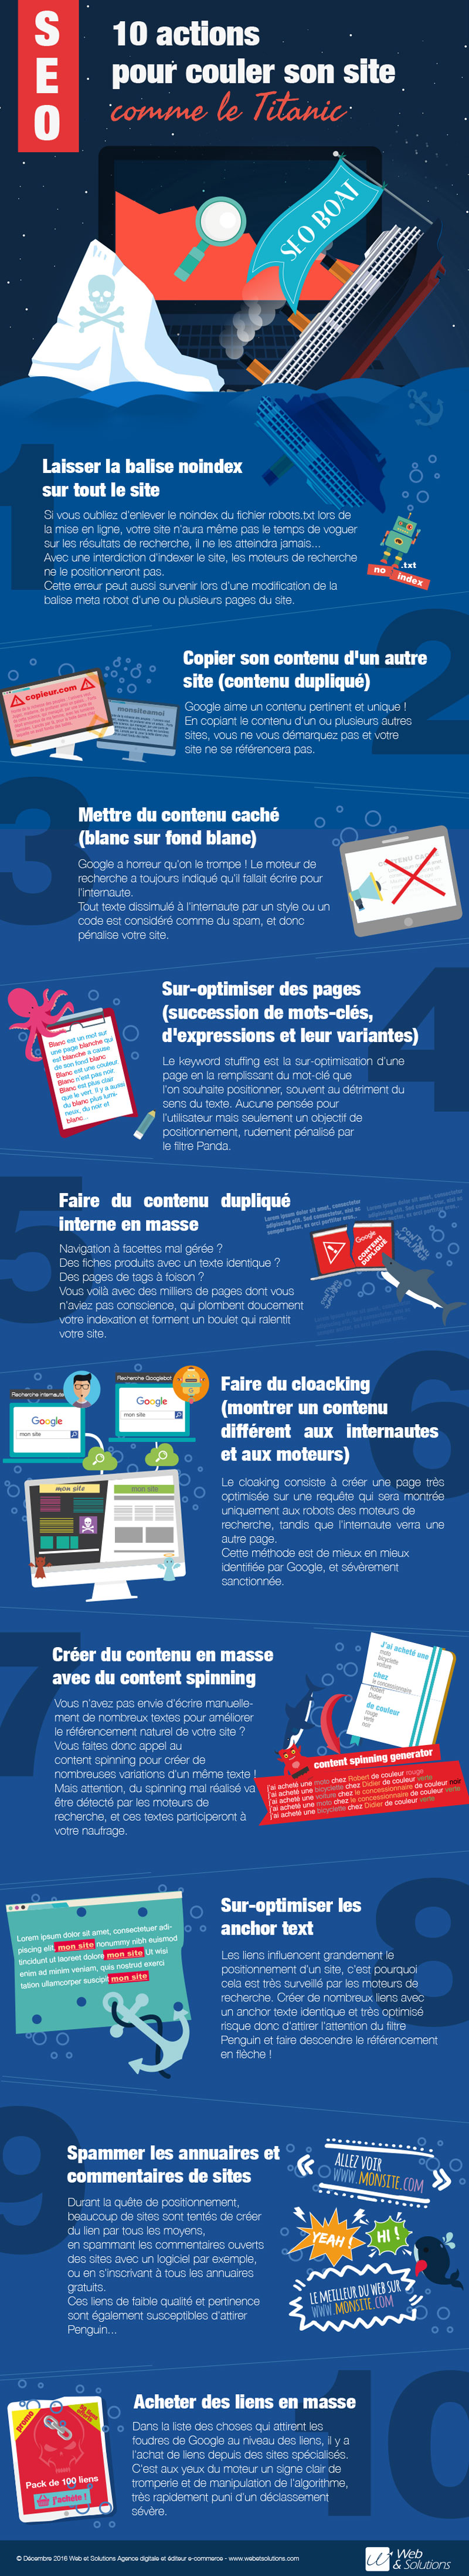 infographie-referencement-10-actions-loupees-titanic